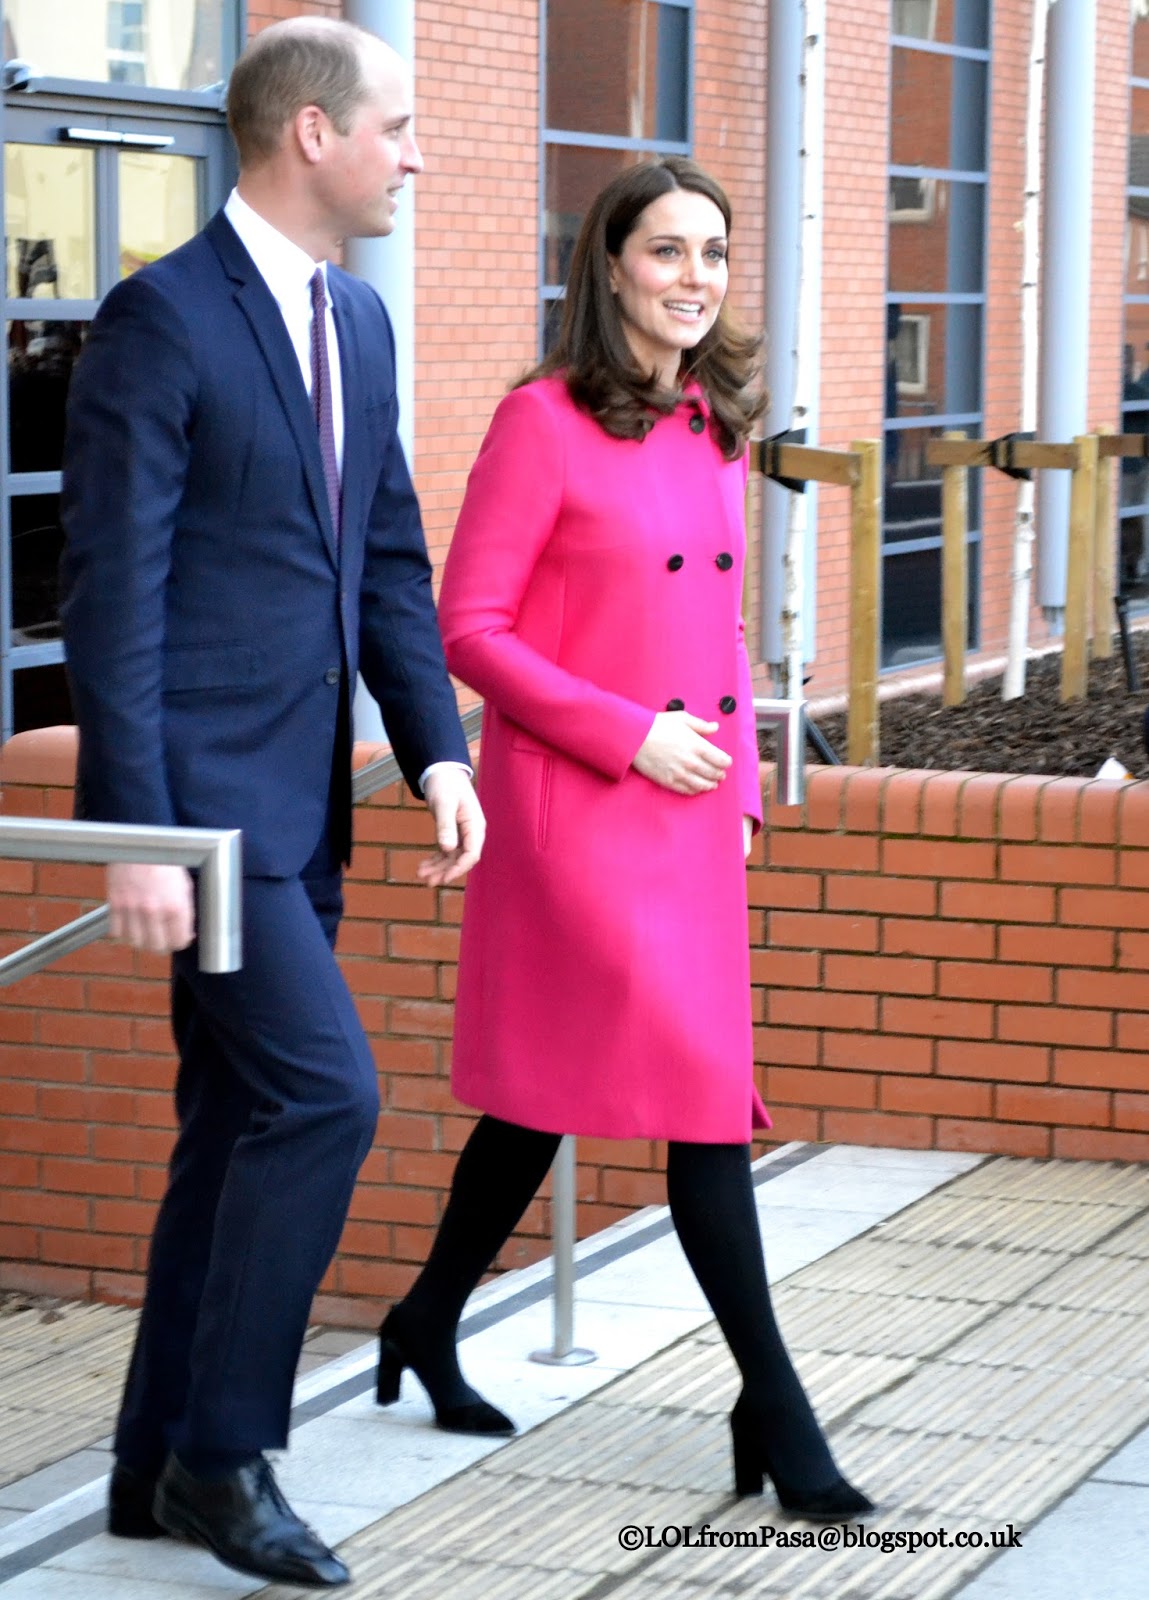 Today Around Coventry: Royal Visit To Coventry